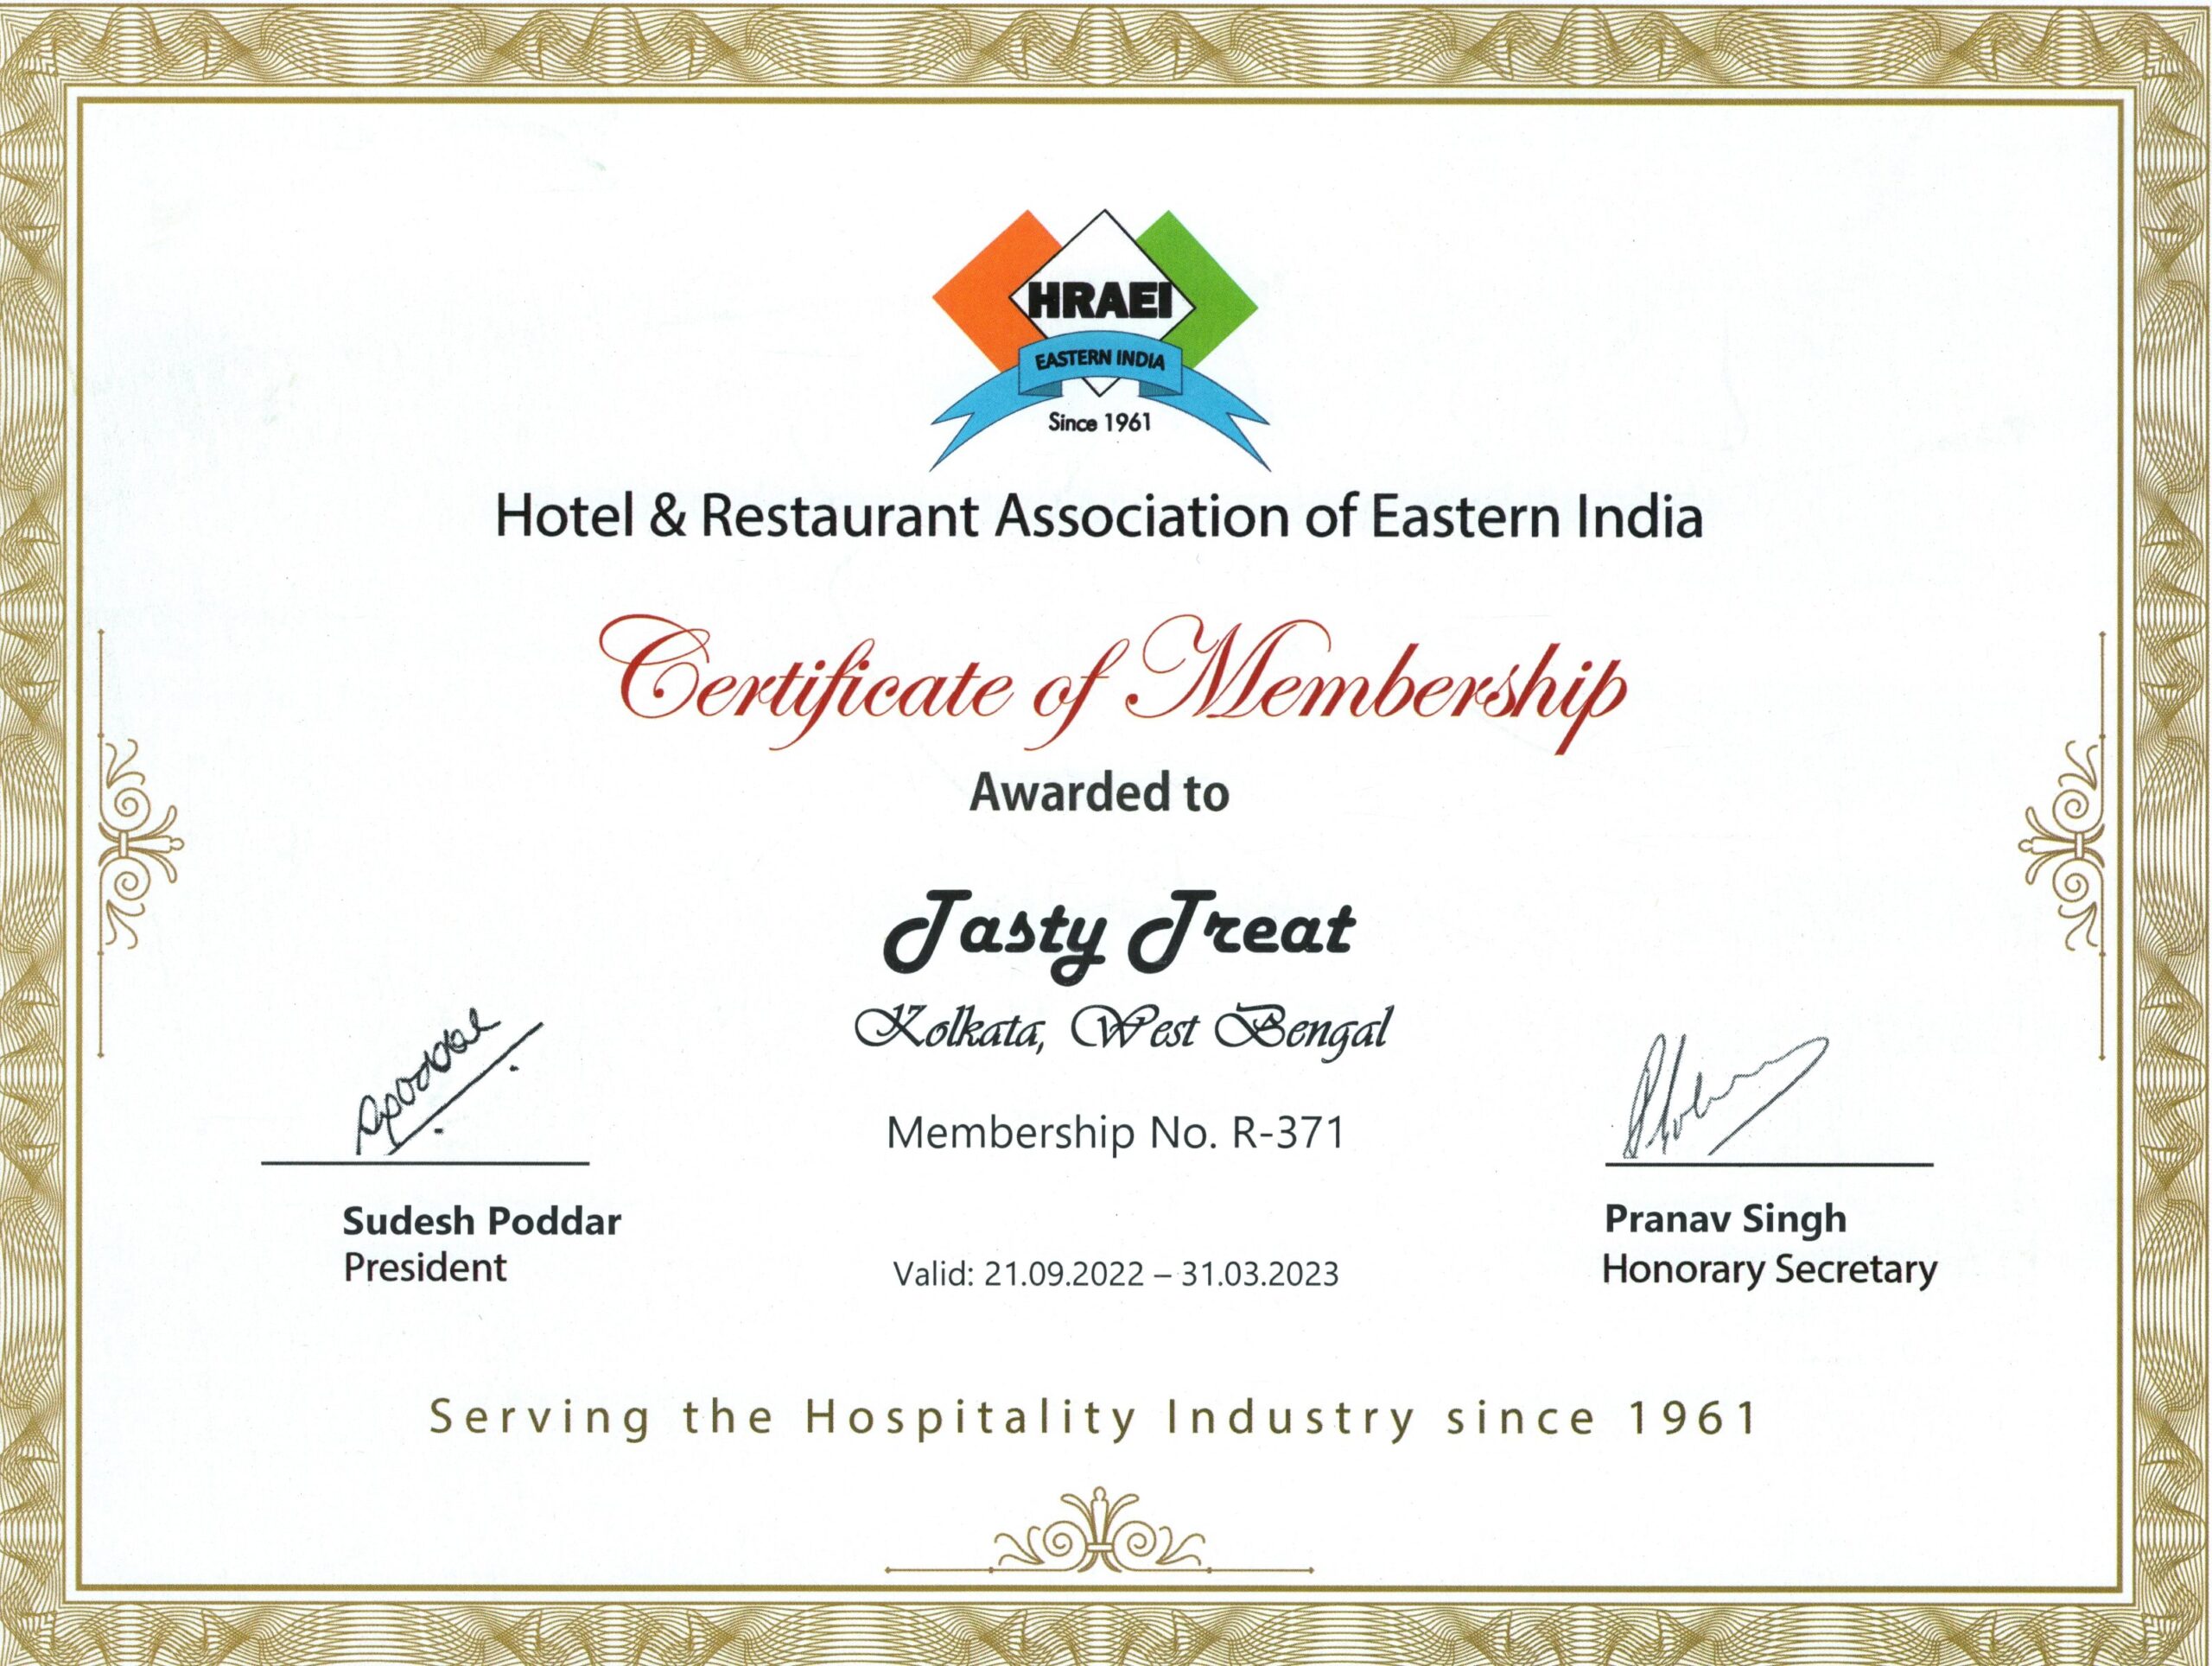 An elegantly designed membership recognition certificate from Tasty Treat Restaurant. It features a sophisticated layout featuring the restaurant's name, decorative border, and formal typography. This certificate recognizes Tasty Treat's contribution to creating outstanding food, exceptional service, and unforgettable dining experiences.